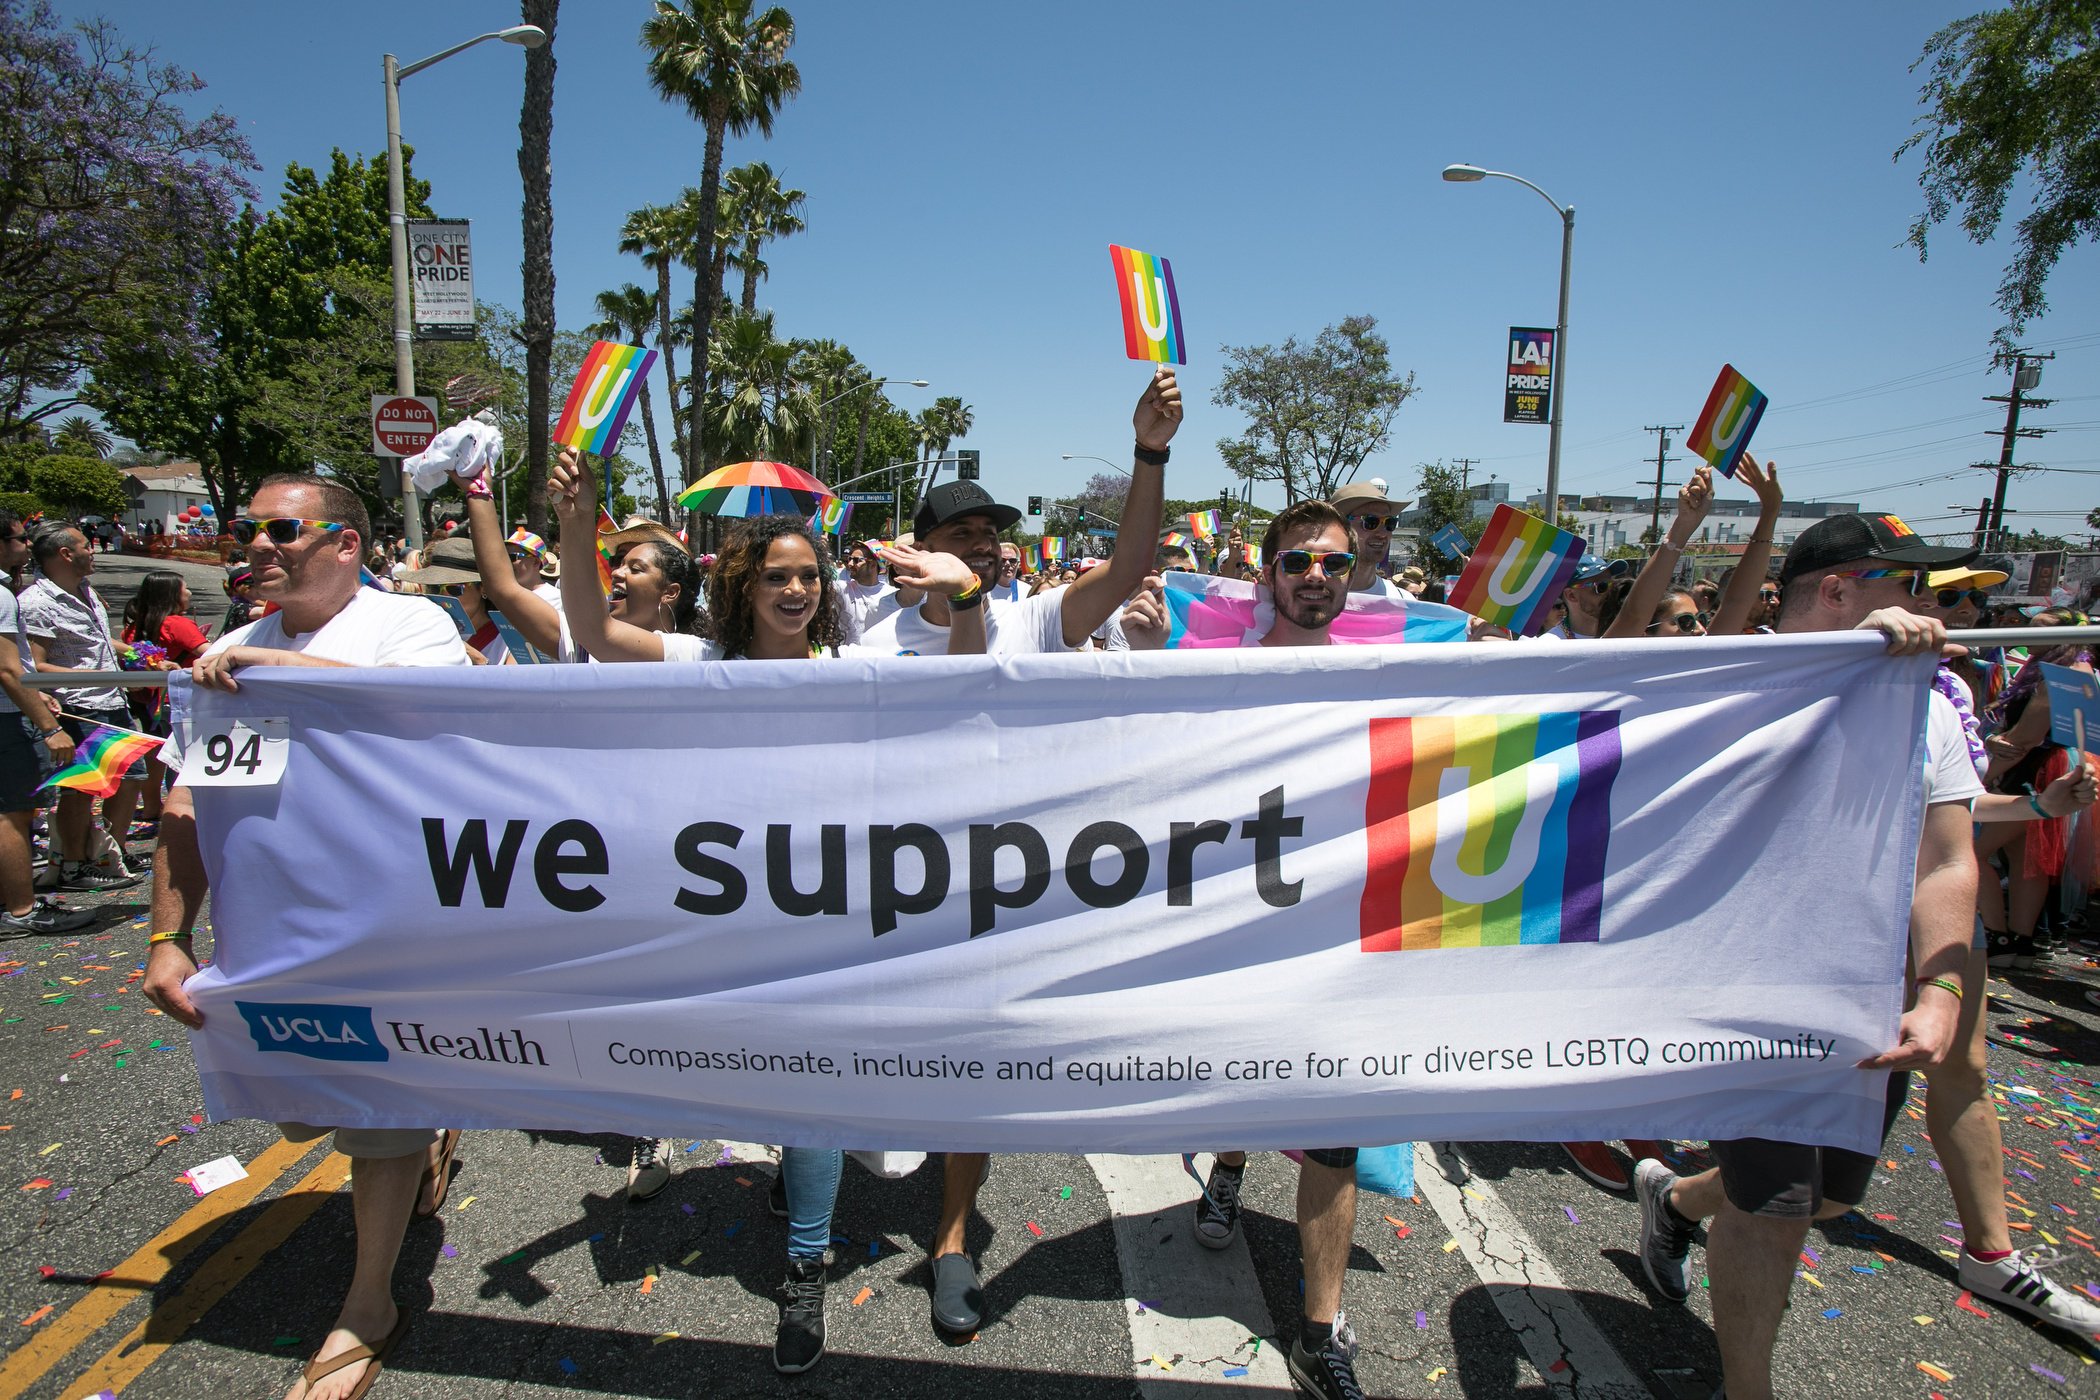 UCLA community at the Pride parade